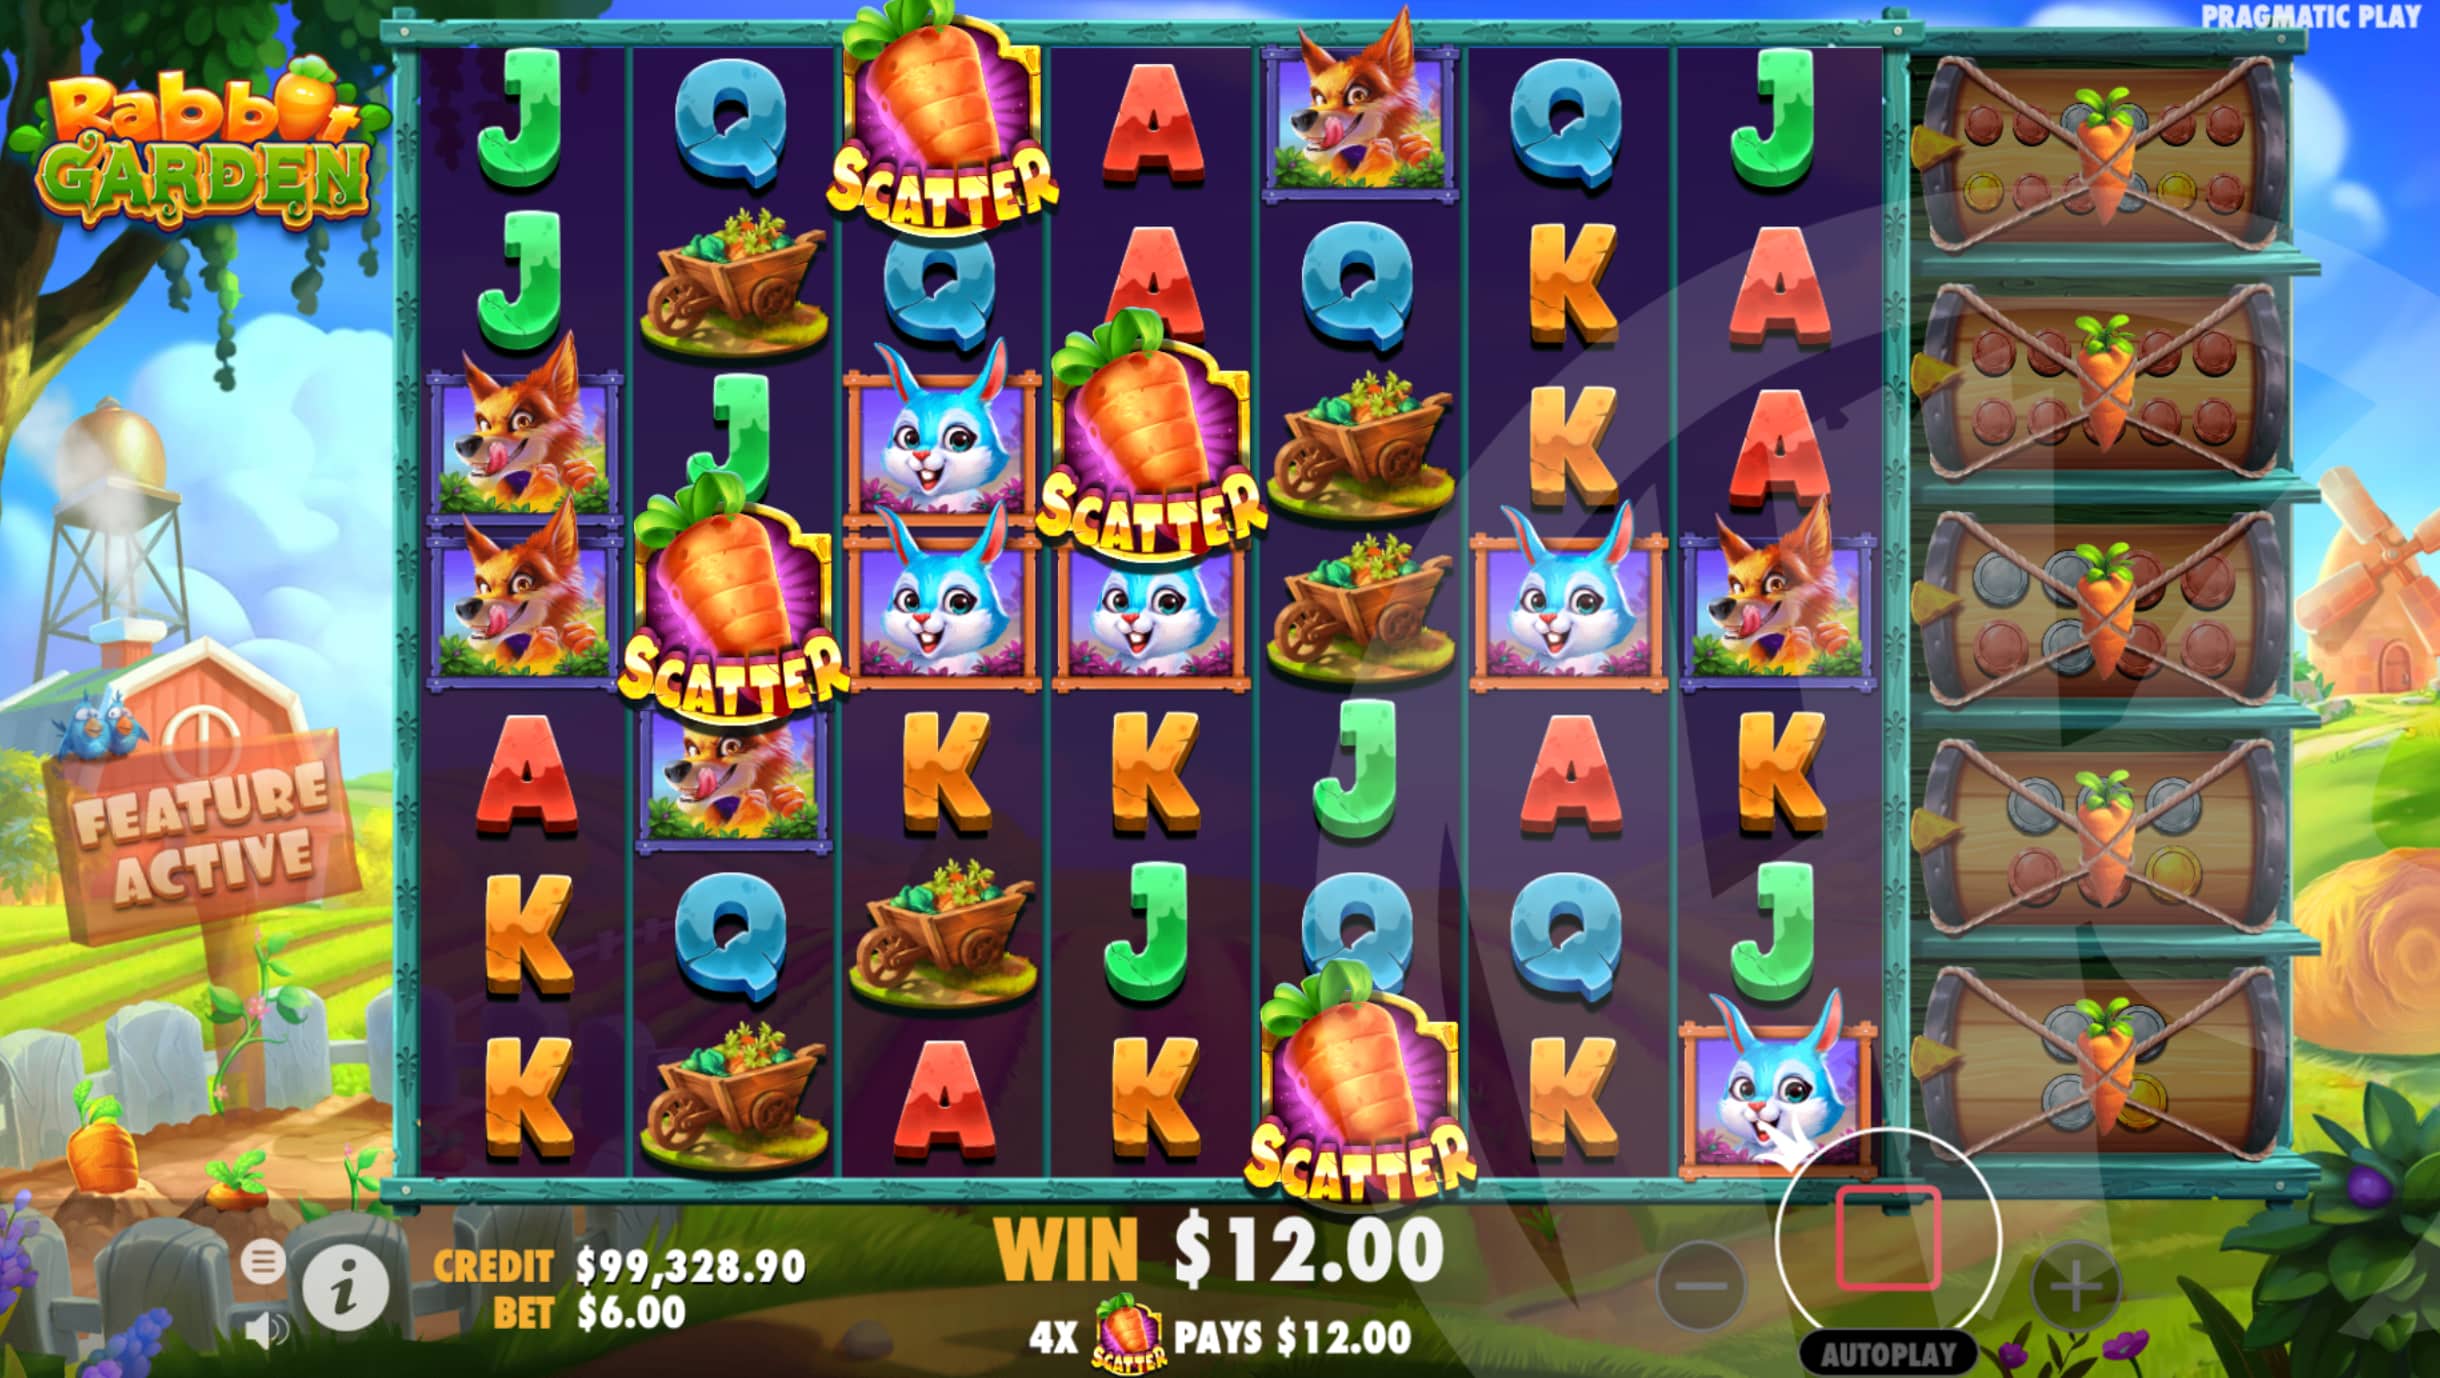 Land 4 or More Scatters to Trigger Free Spins